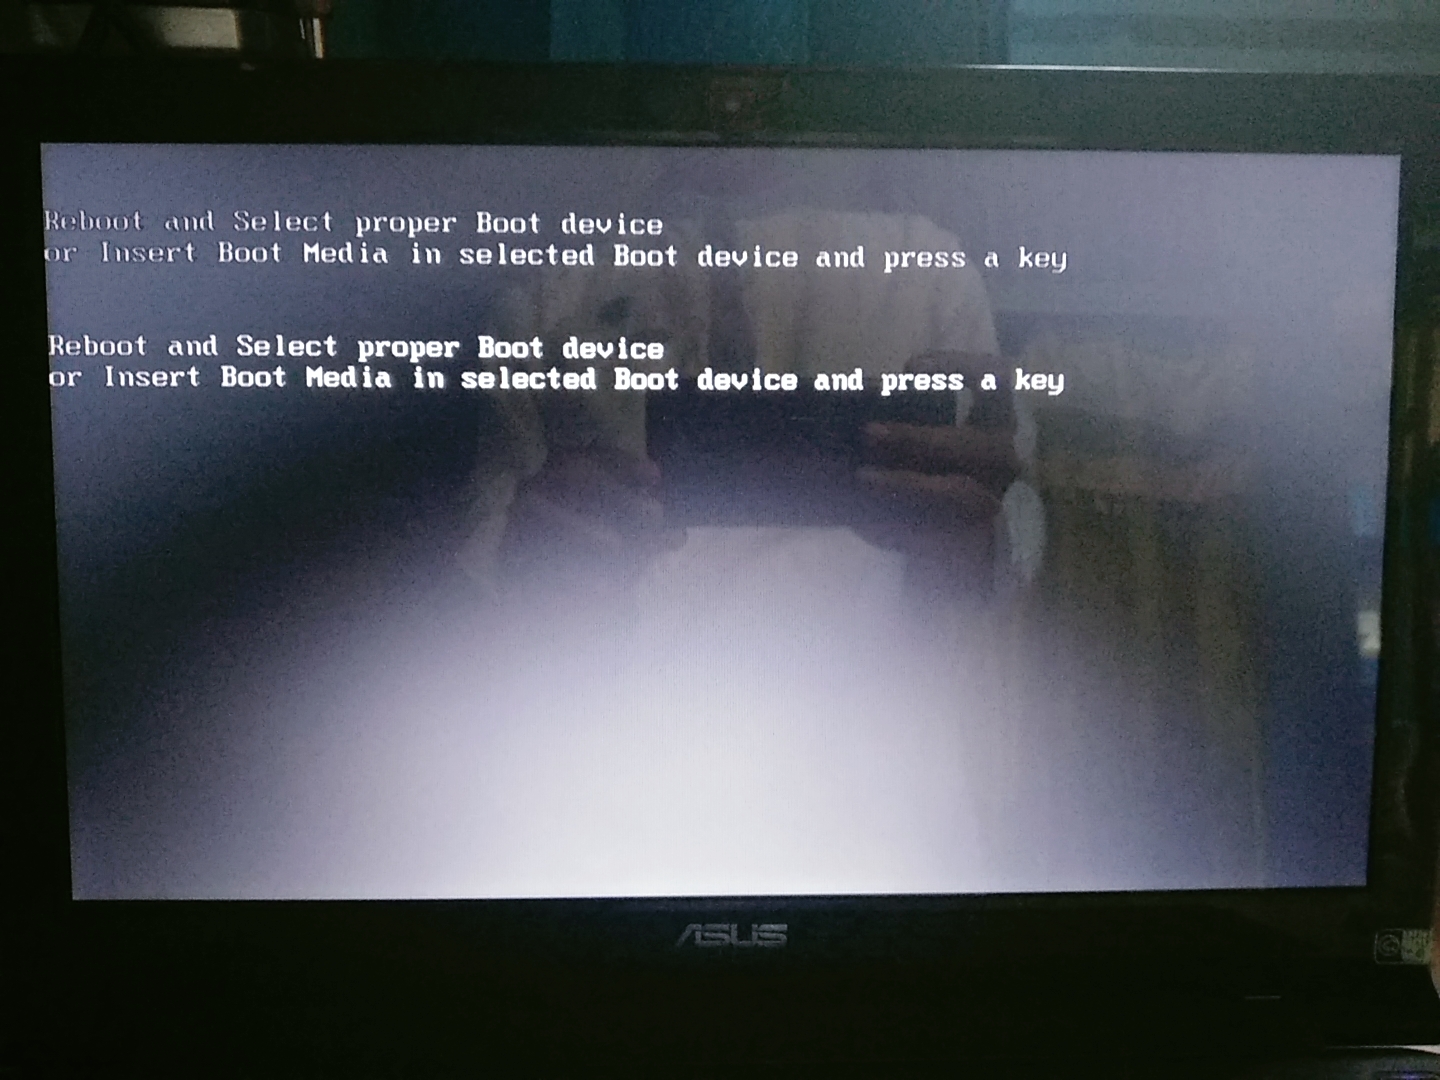 Boot device ноутбук. Reboot and select proper Boot device. Ошибка Reboot and select proper Boot device. Notebook ASUS Reboot and select proper Boot device. No booting device ноутбук